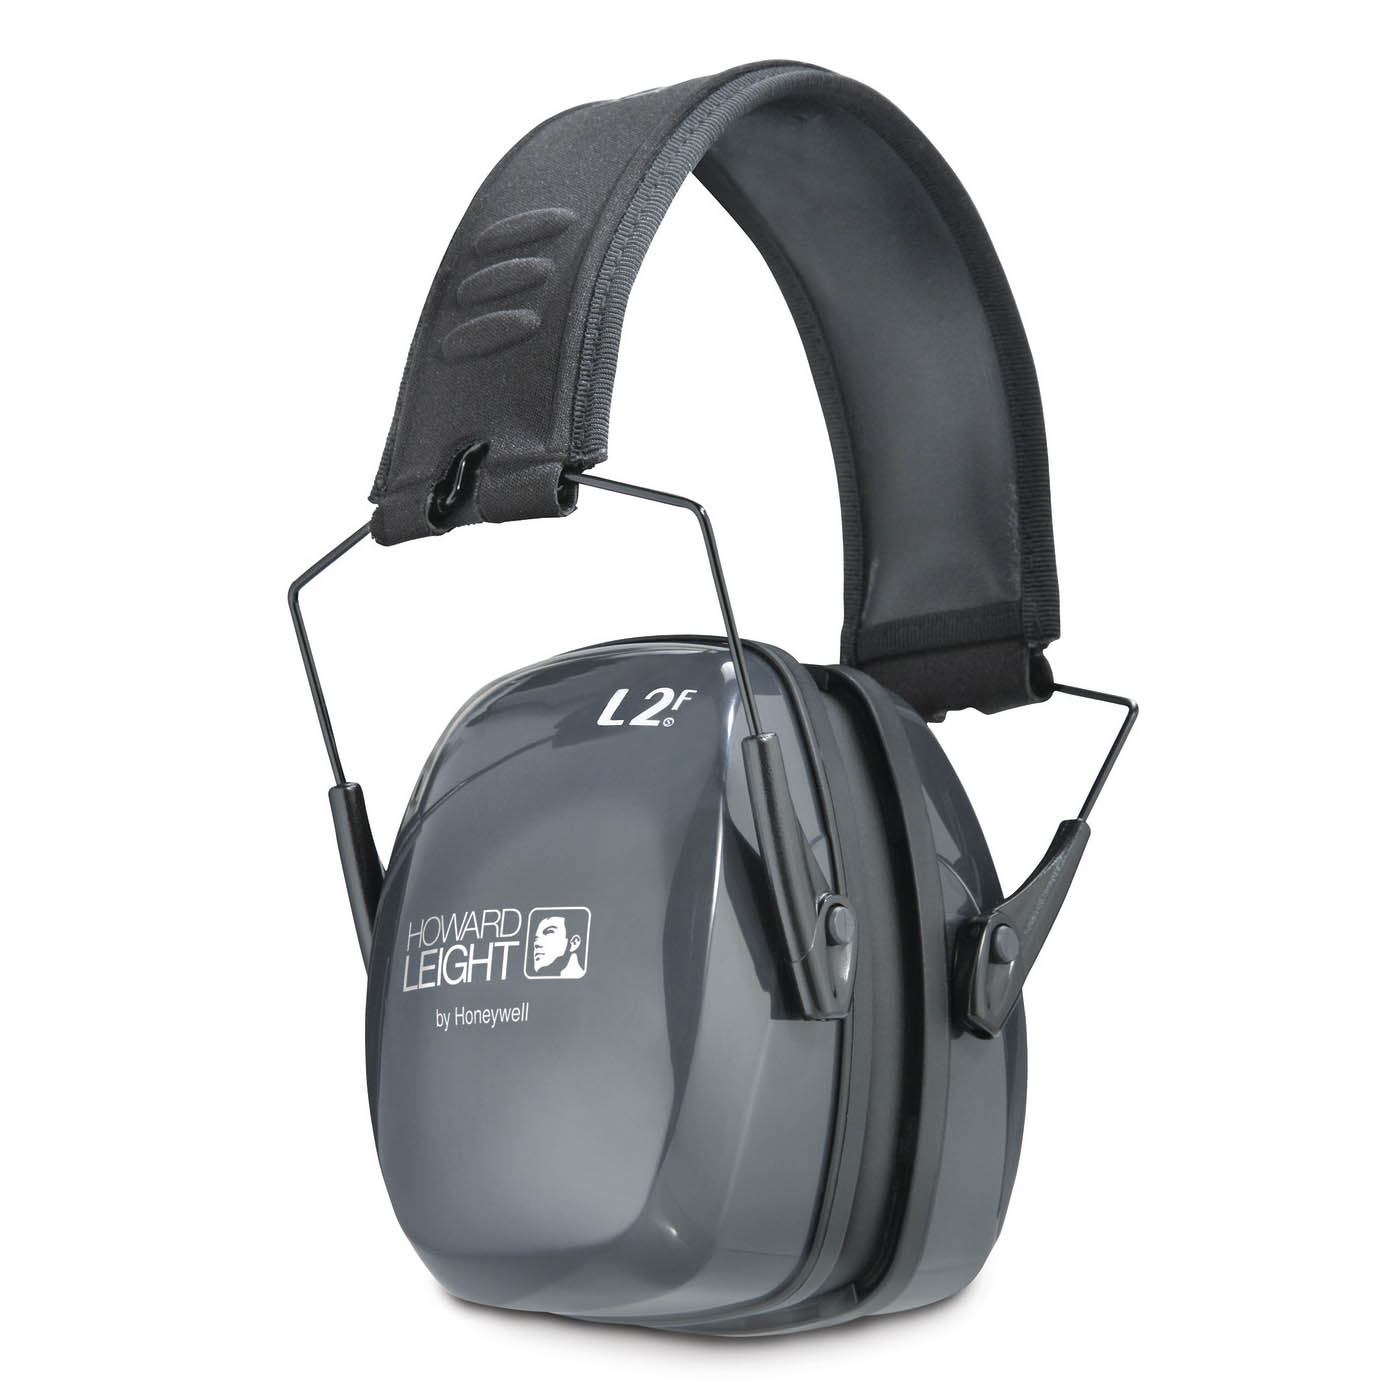 Howard Leight by Honeywell Leightning L2F Folding Style Earmuff, Charcoal Gray - R-01525